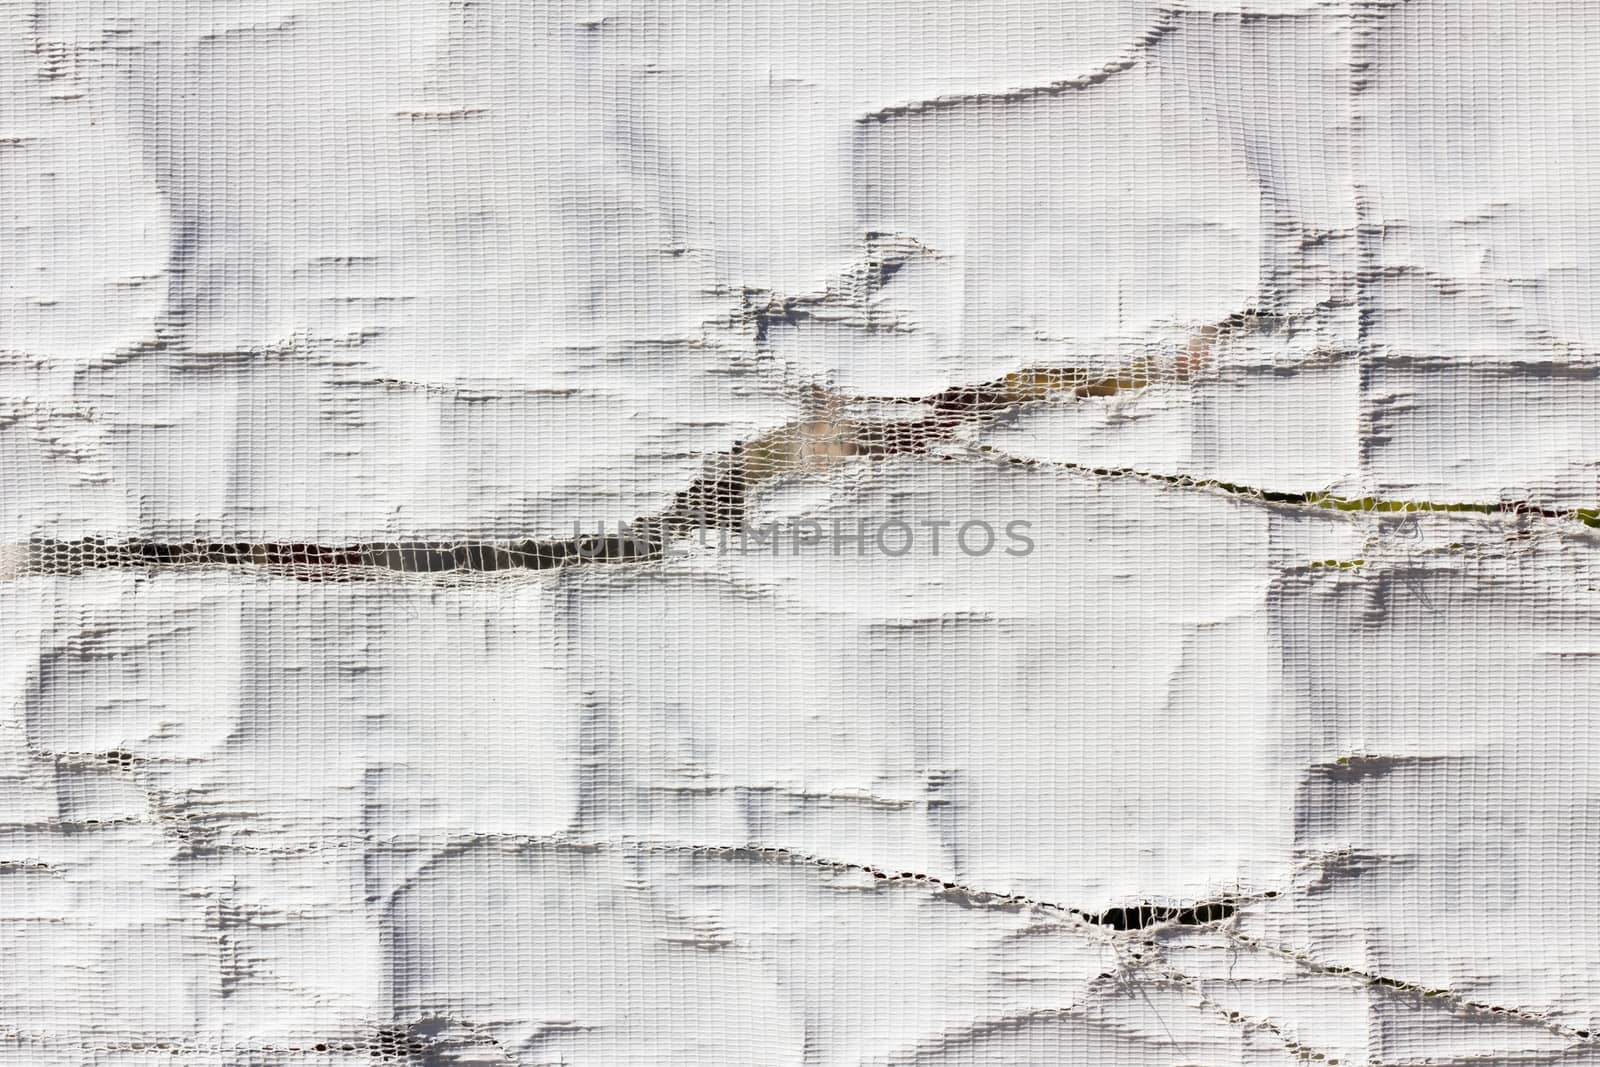 Texture of the old fabric and paper, background by a3701027